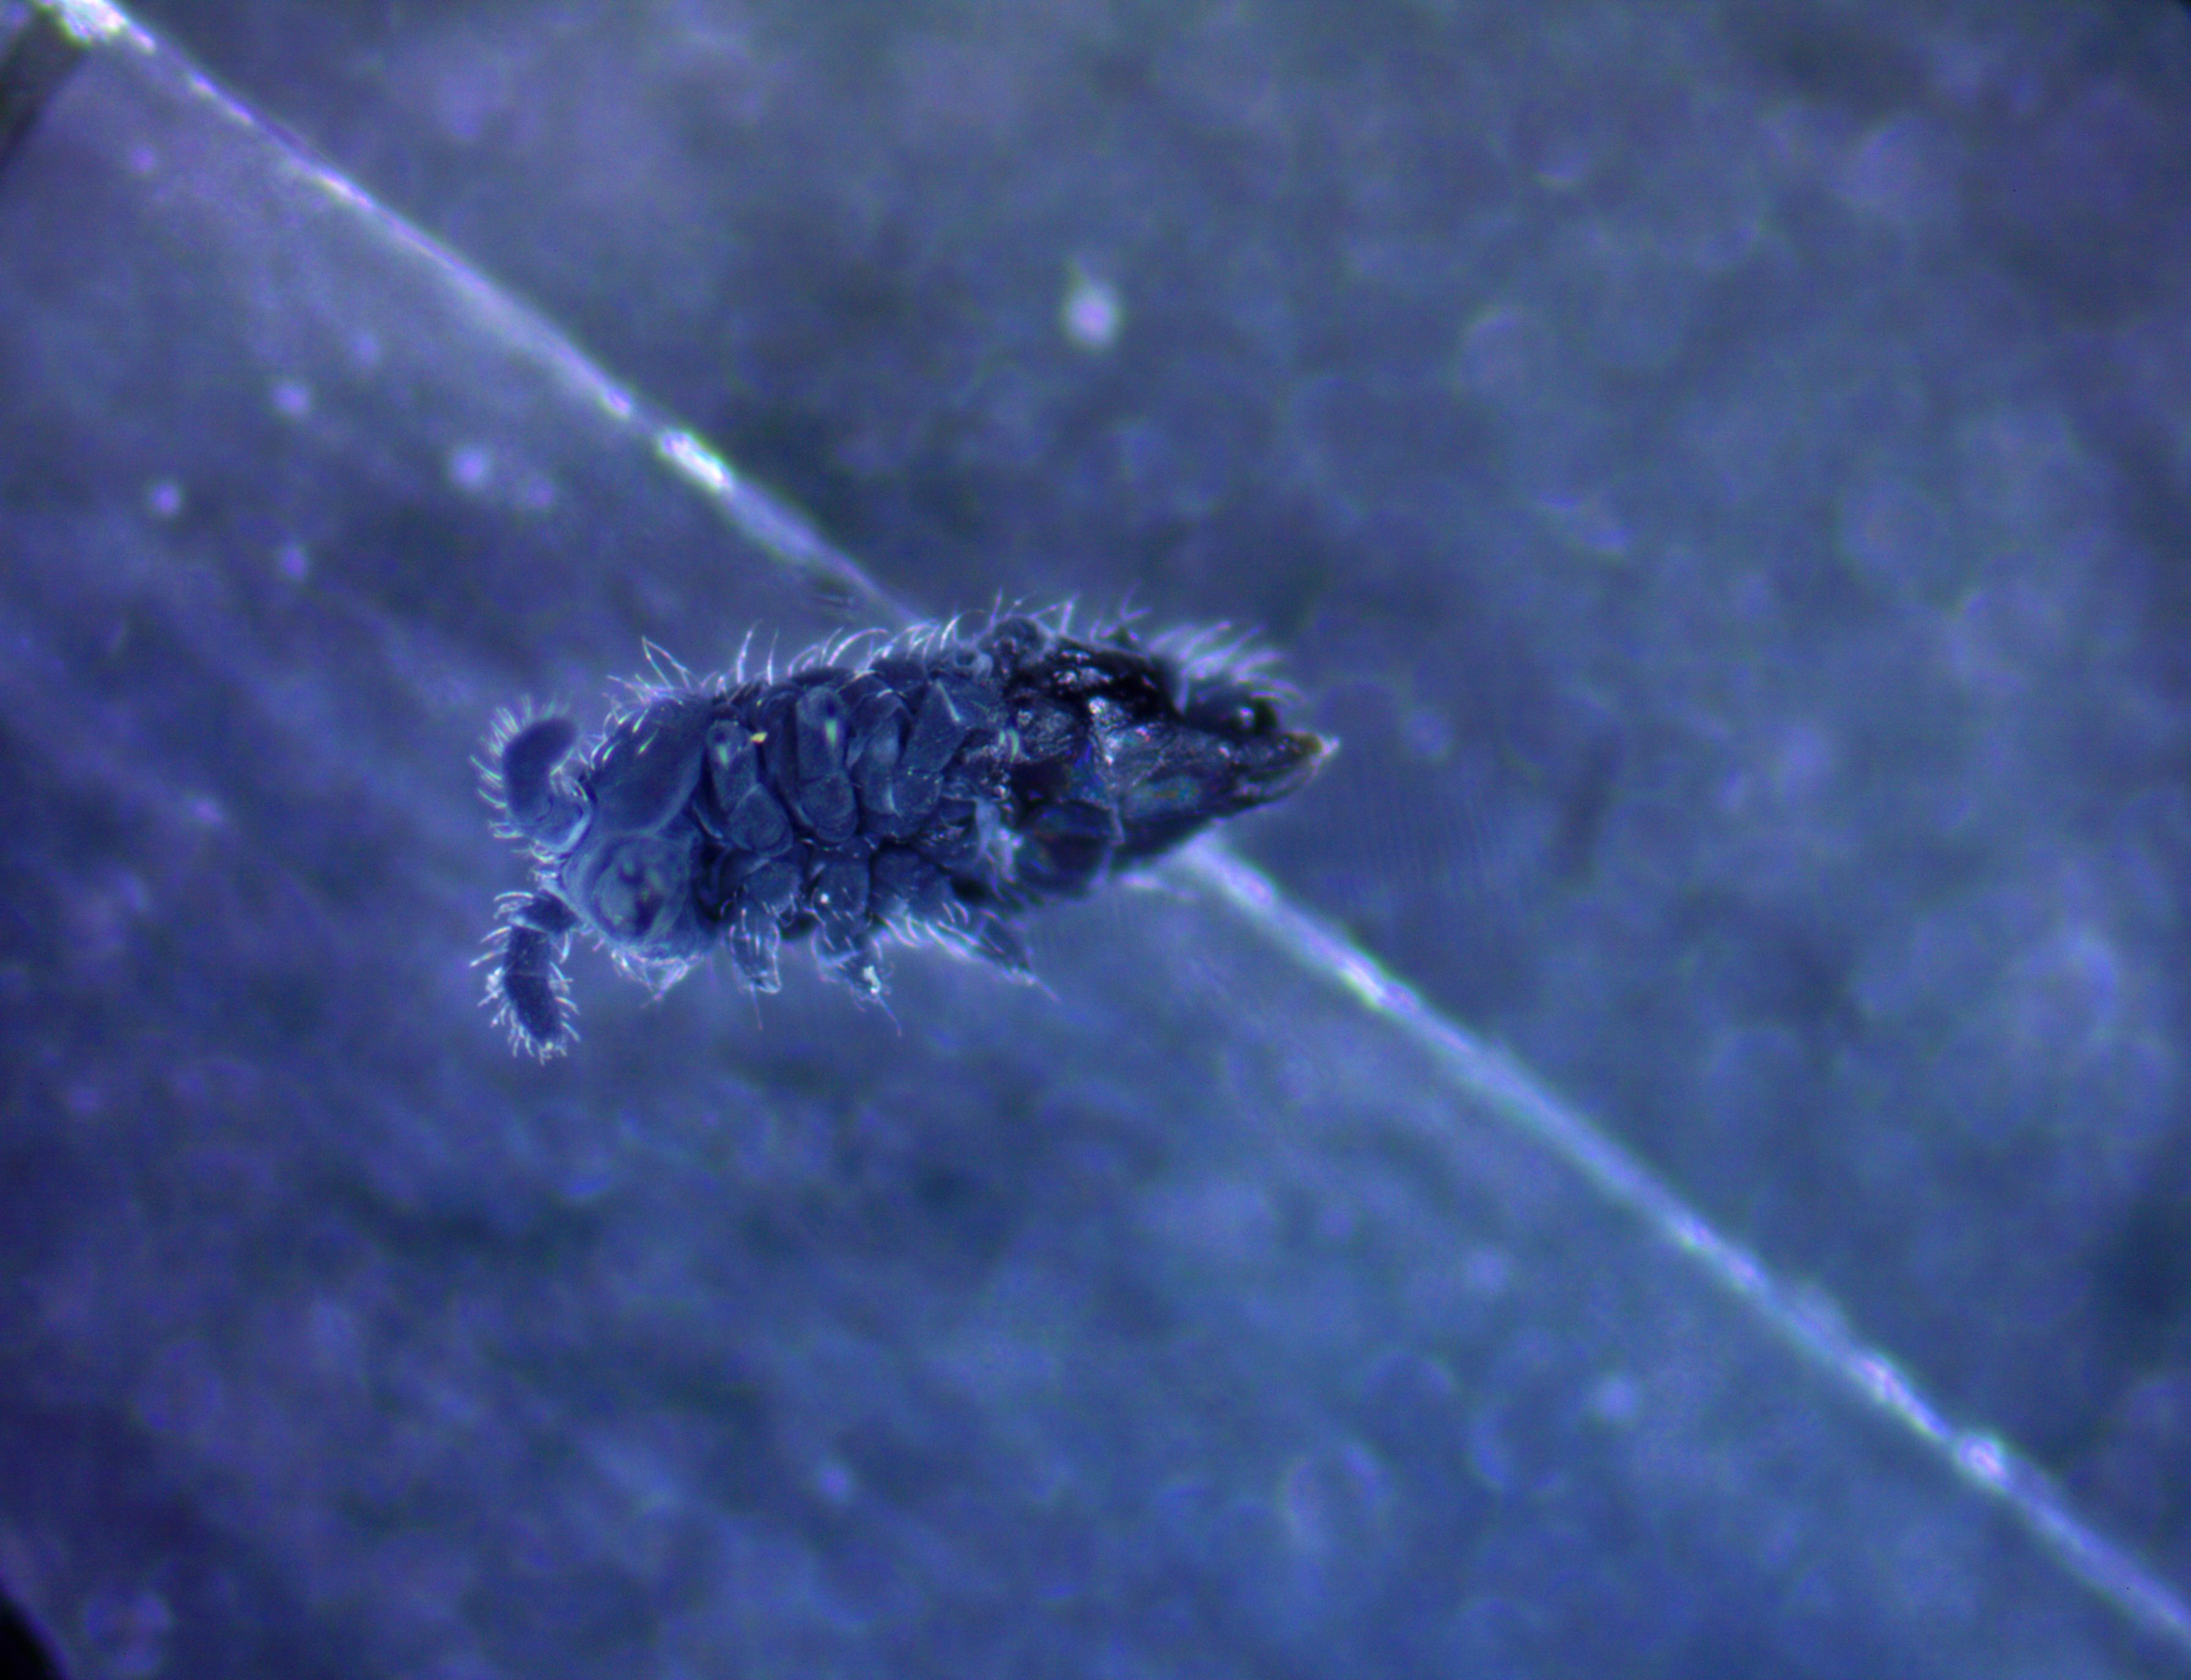 Magnified image of a springtail that is hairy and dark blue in color.